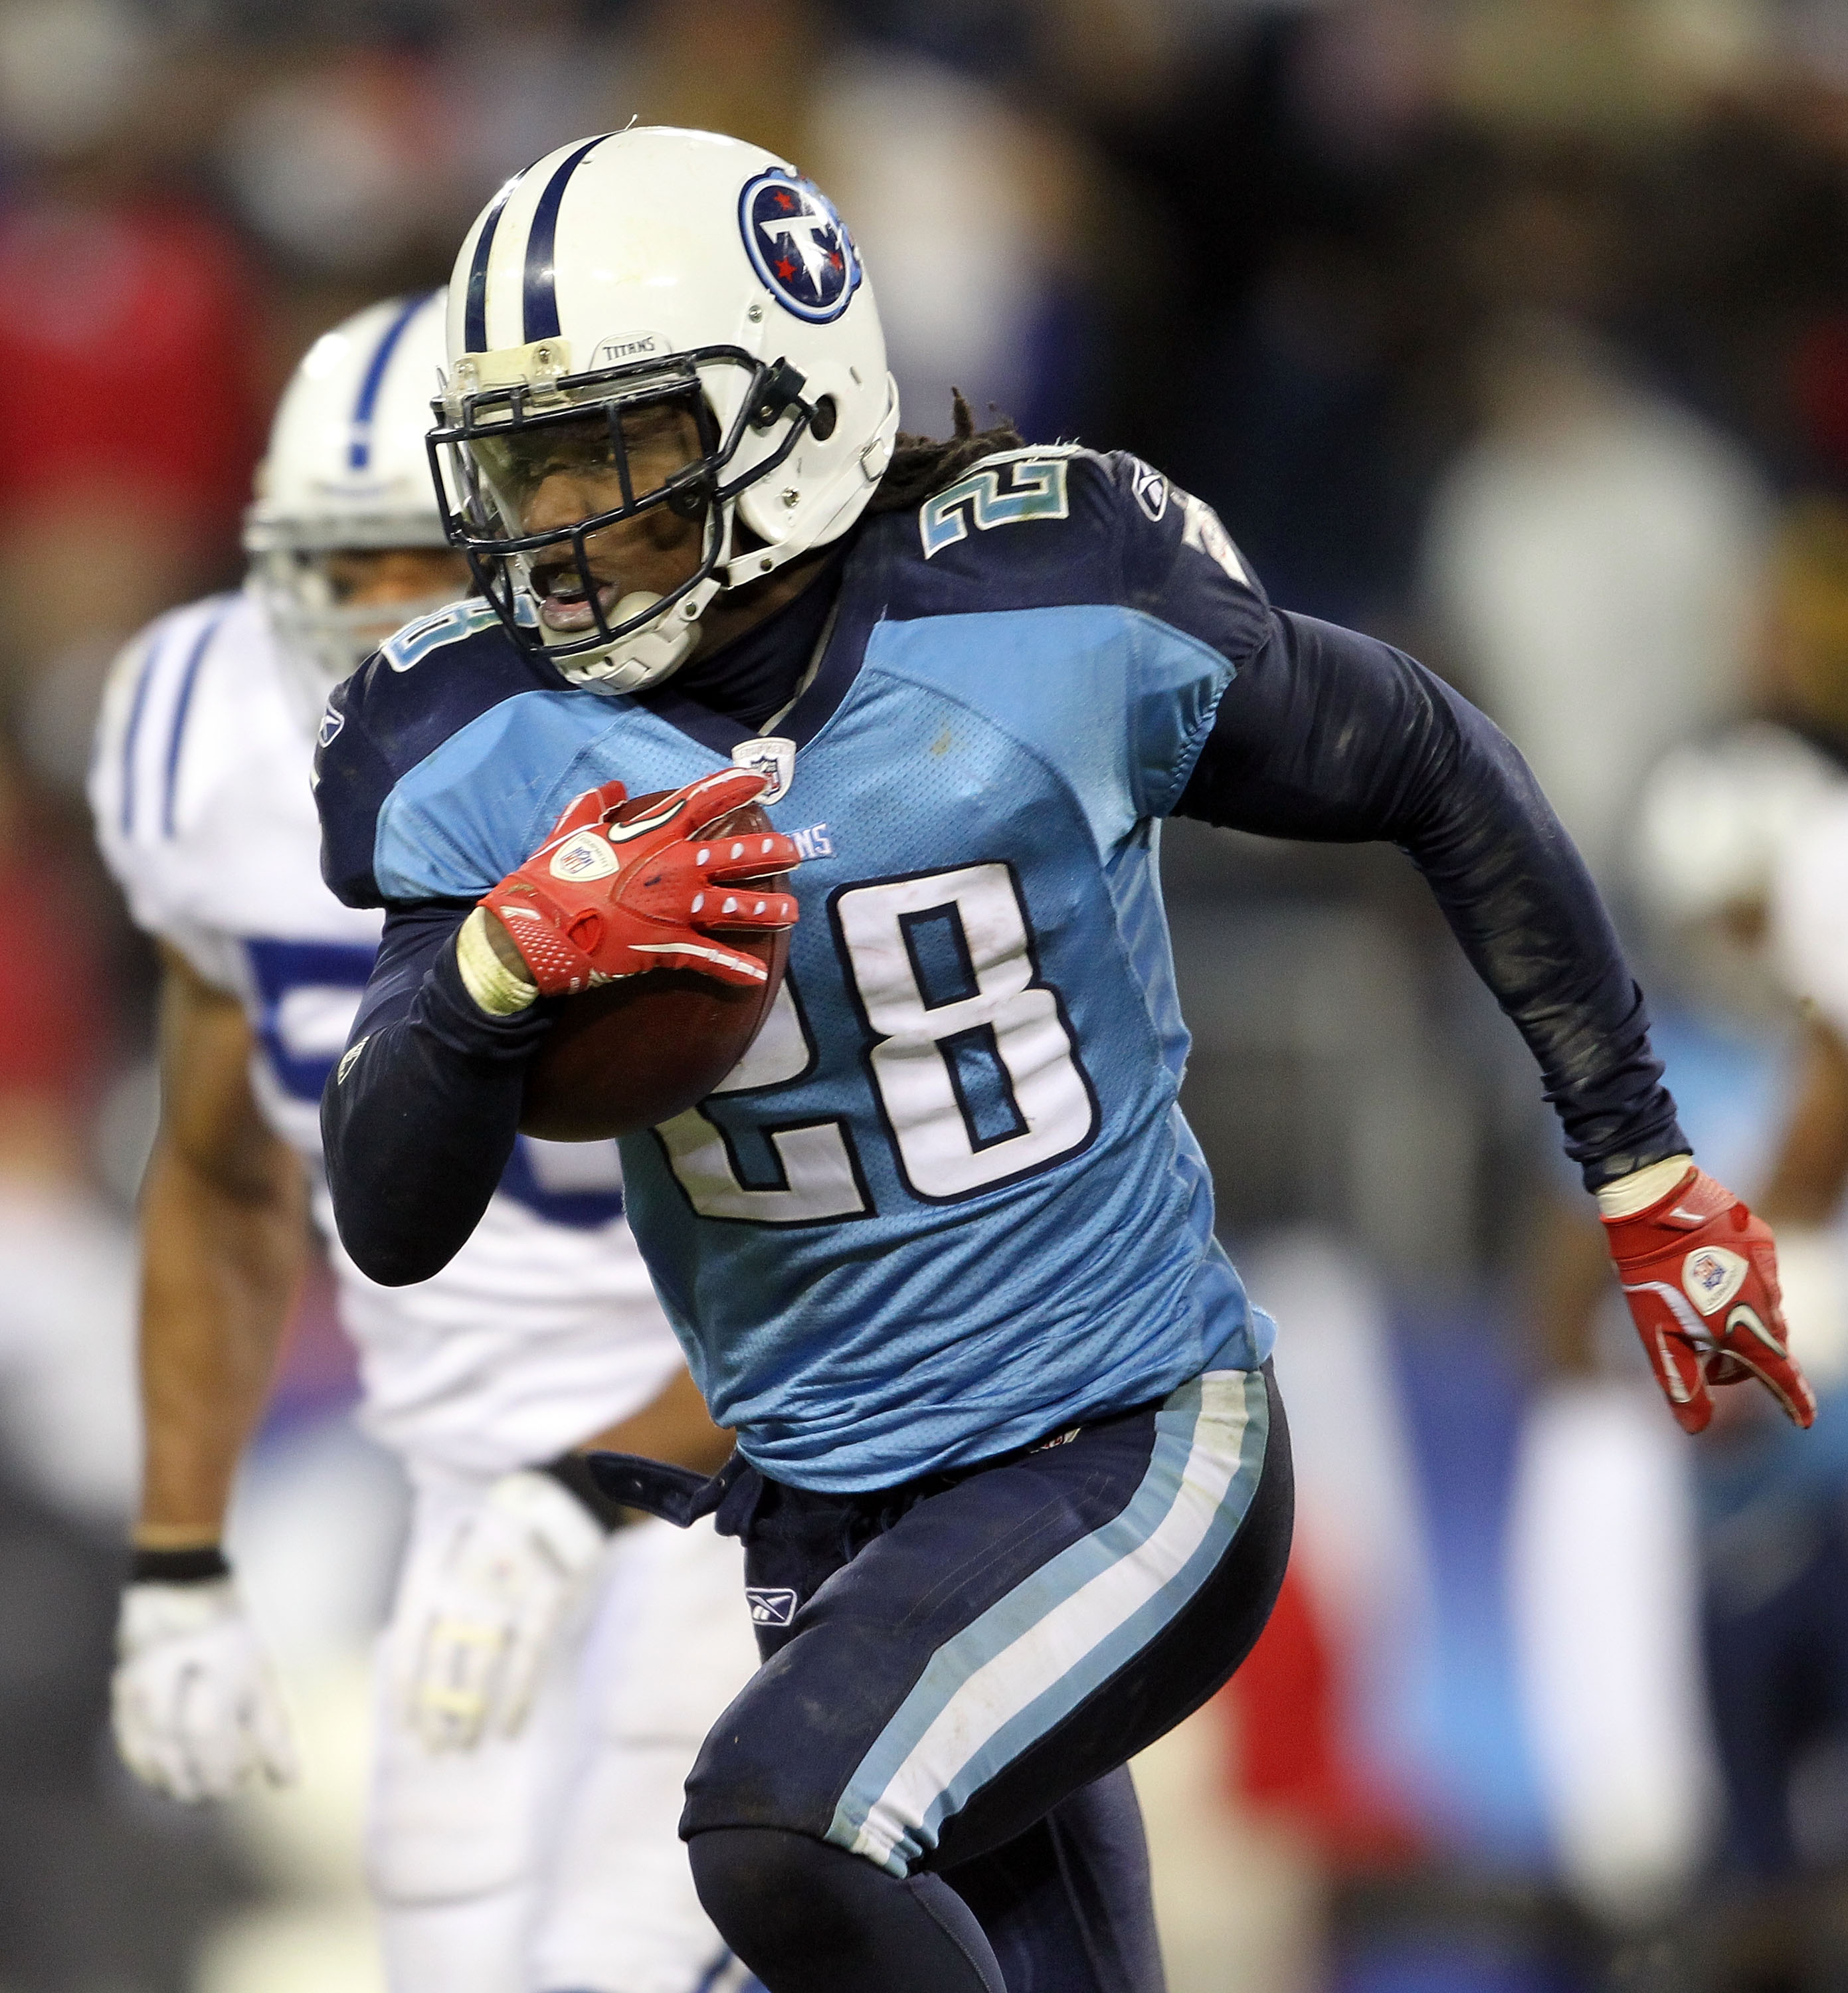 NASHVILLE, TN - DECEMBER 09:  Chris Johnson #28 of the Tennessee Titans runs with the ball against the Indianapolis Colts during the NFL game at LP Field on December 9, 2010 in Nashville, Tennessee.  (Photo by Andy Lyons/Getty Images)